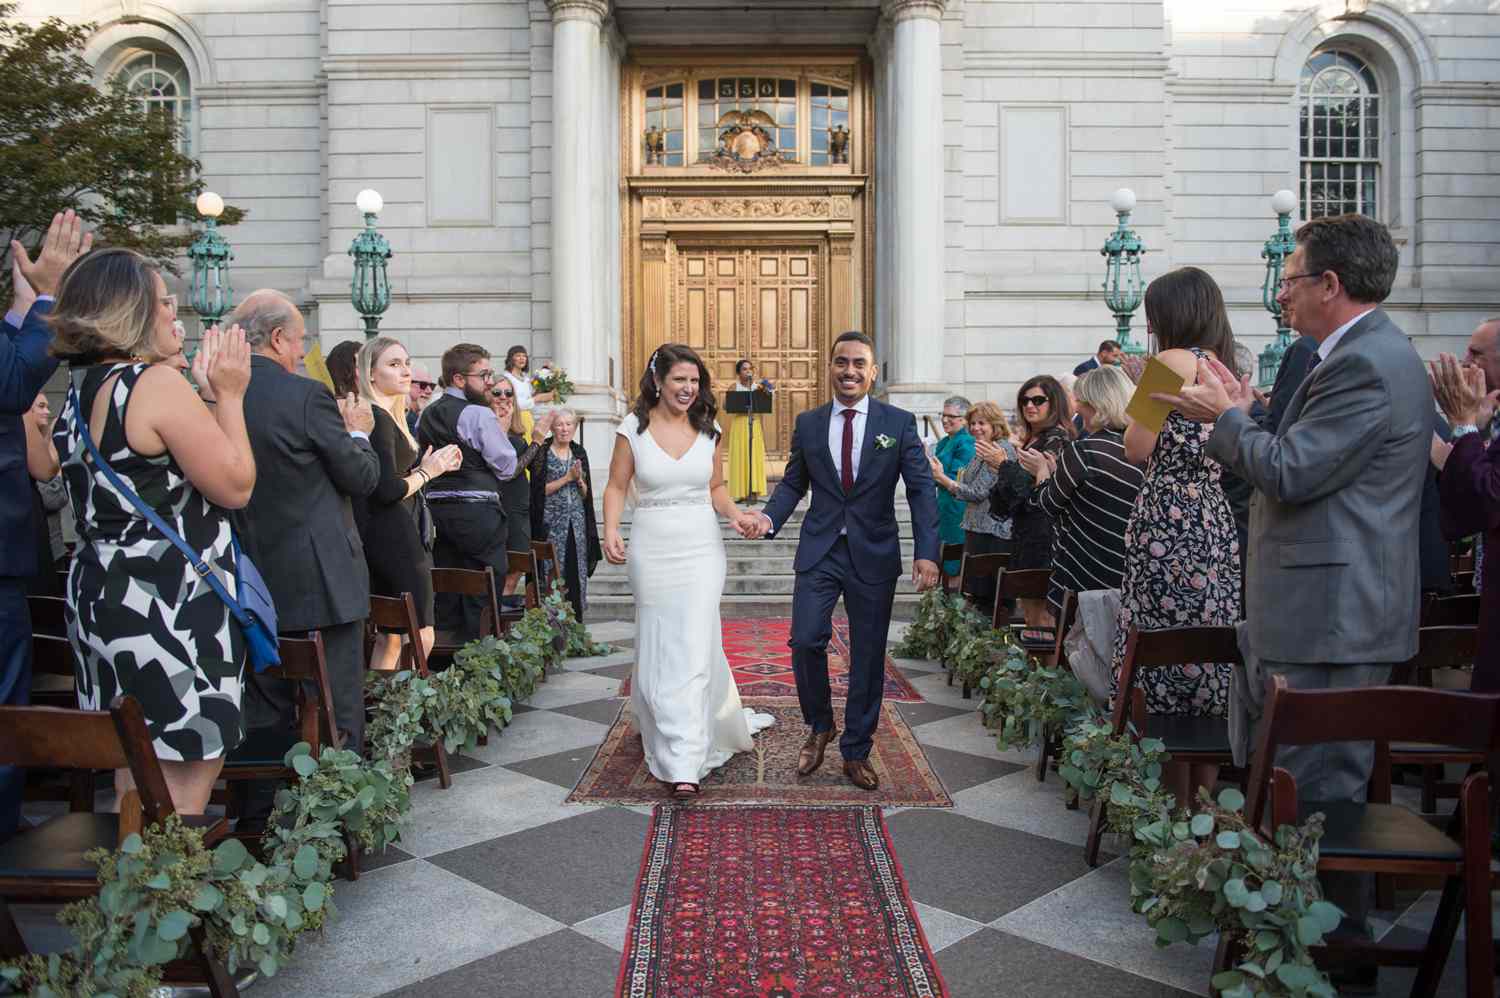 city hall wedding recessional bride and groom walking down path of rugs